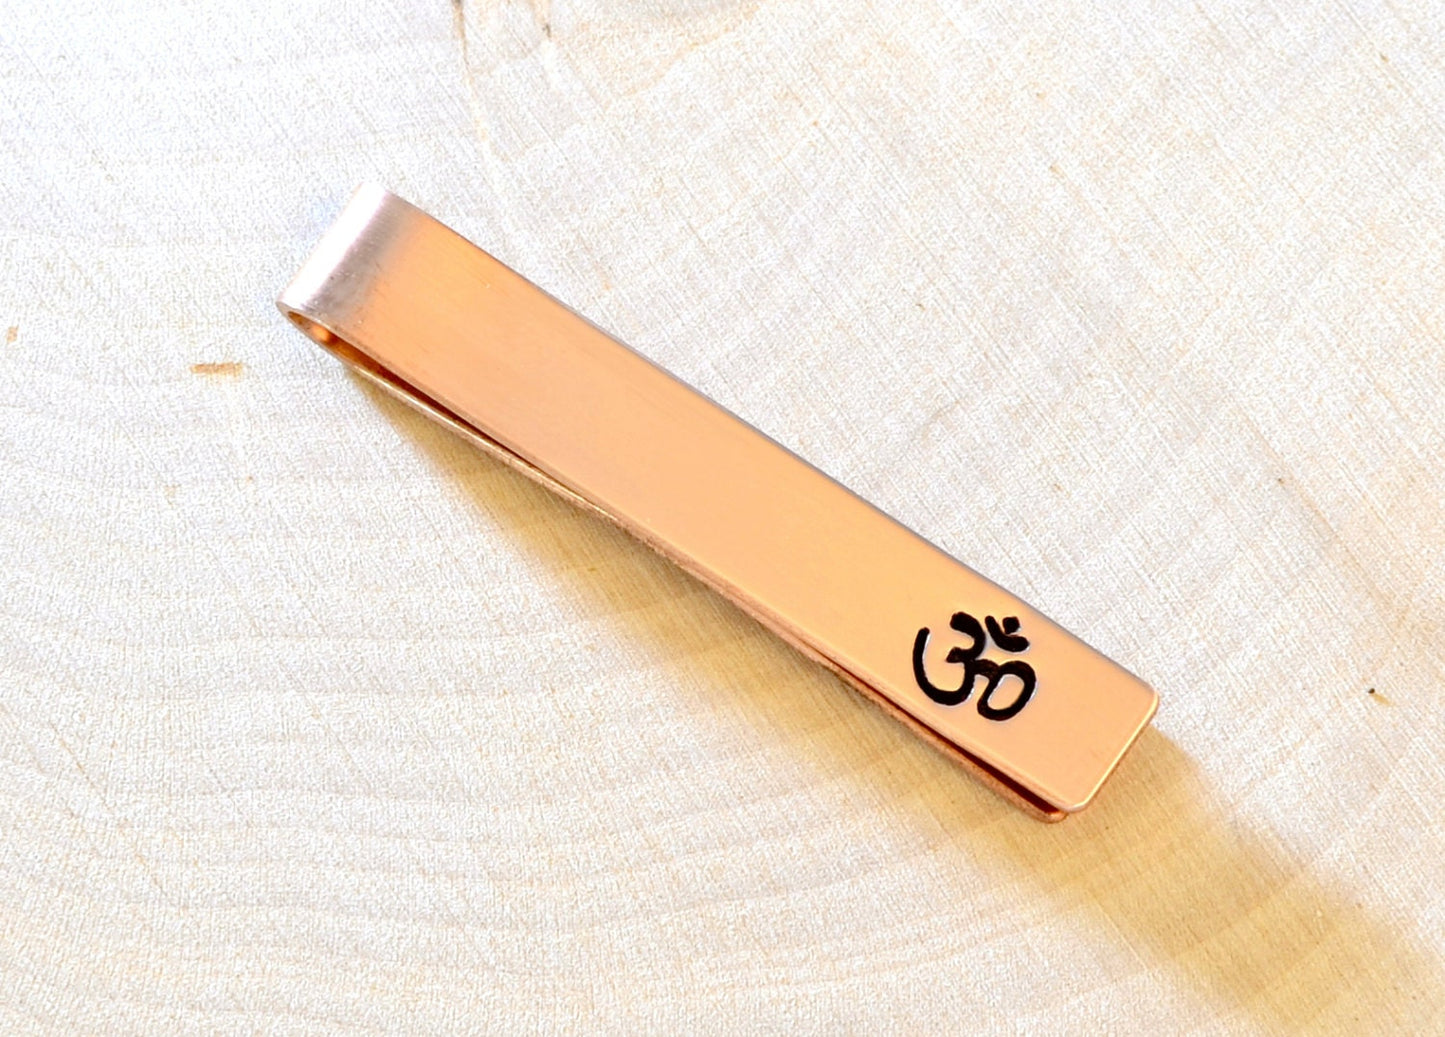 Yoga themed copper tie clip with Aum